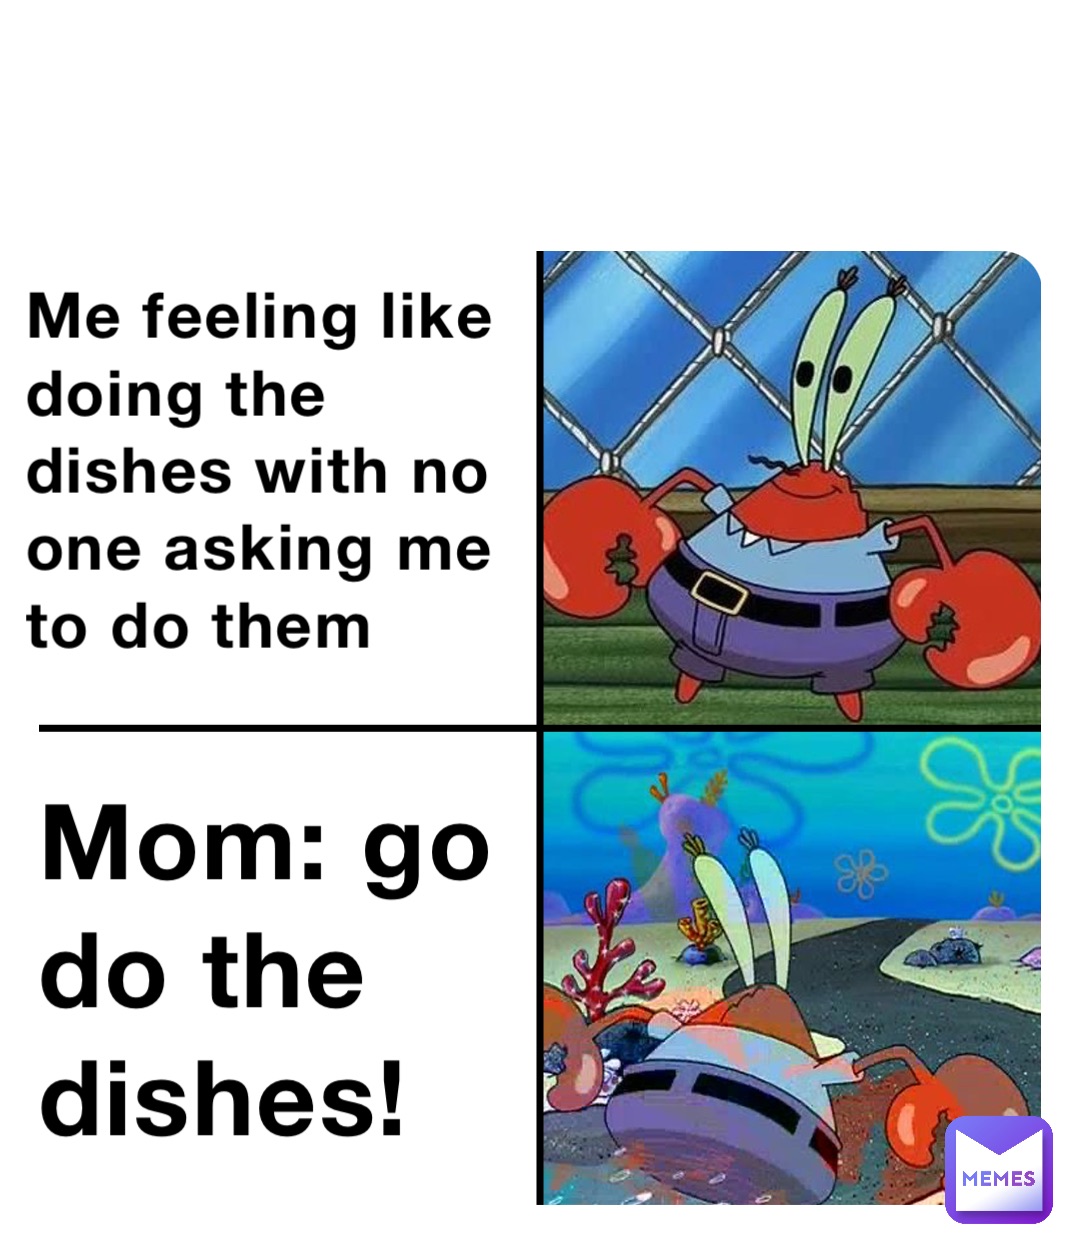 Me feeling like doing the dishes with no one asking me to do them Mom: go do the dishes!